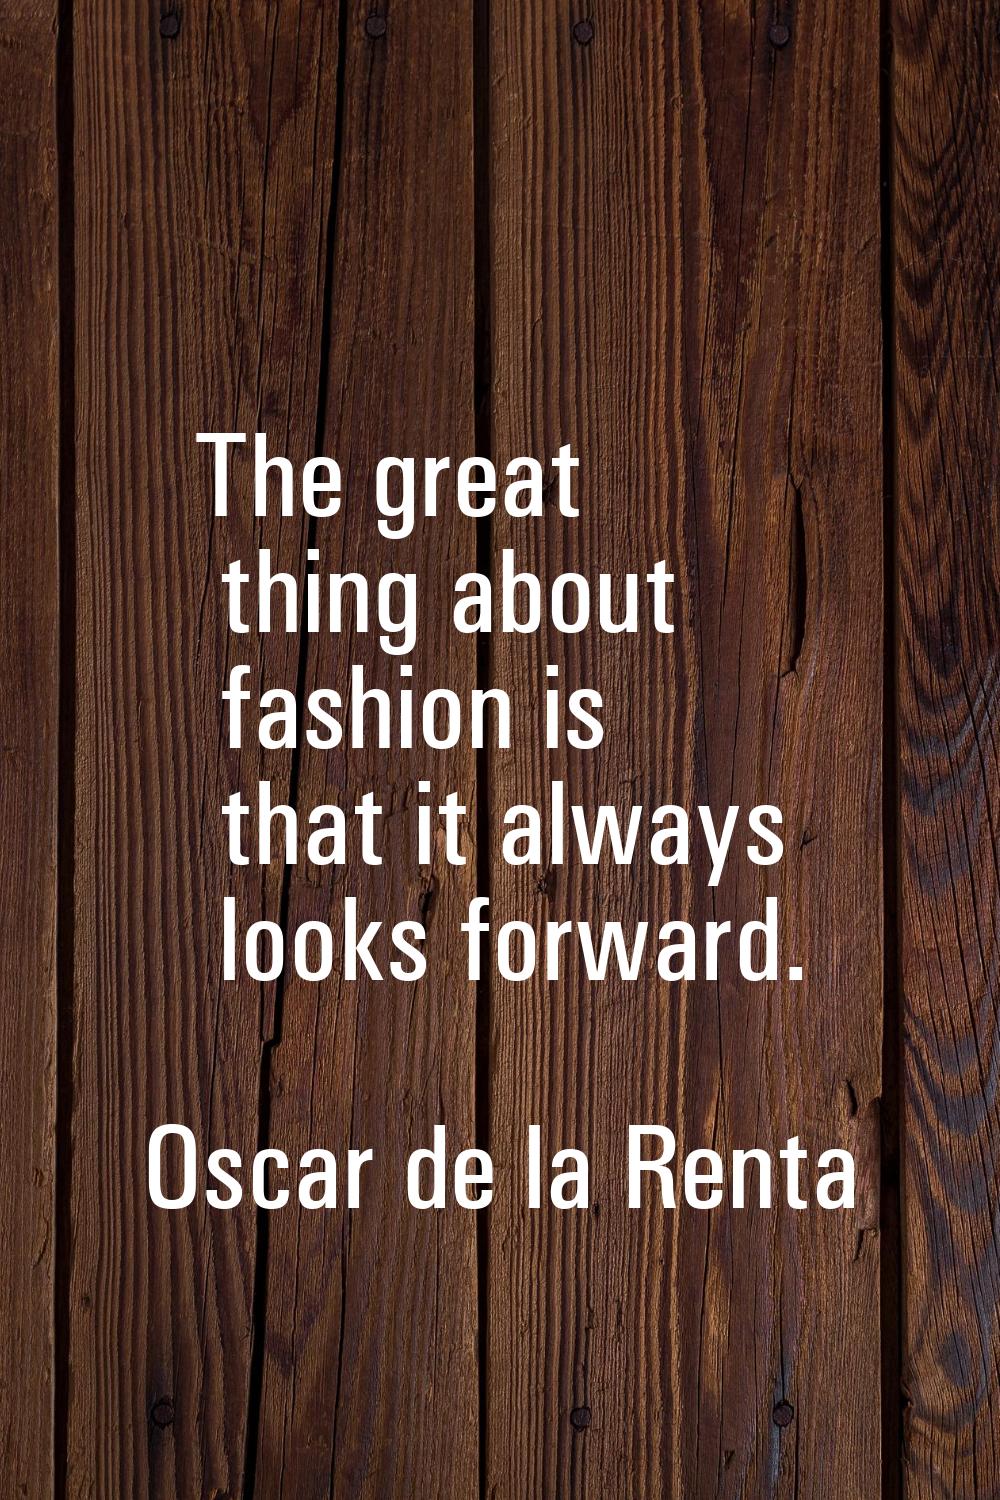 The great thing about fashion is that it always looks forward.